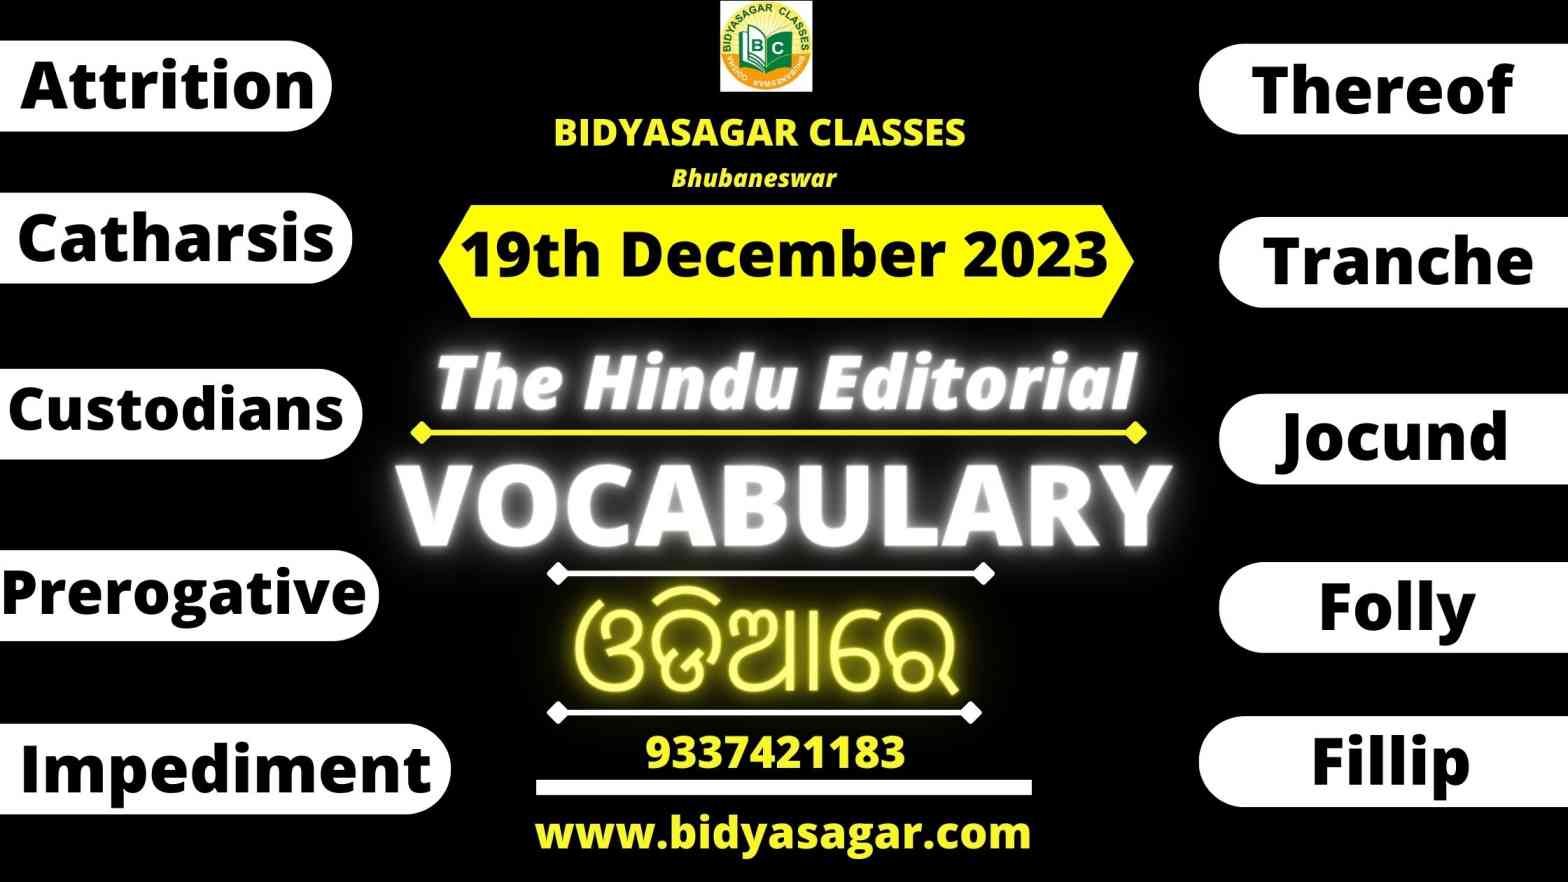 The Hindu Editorial Vocabulary of 19th December 2023